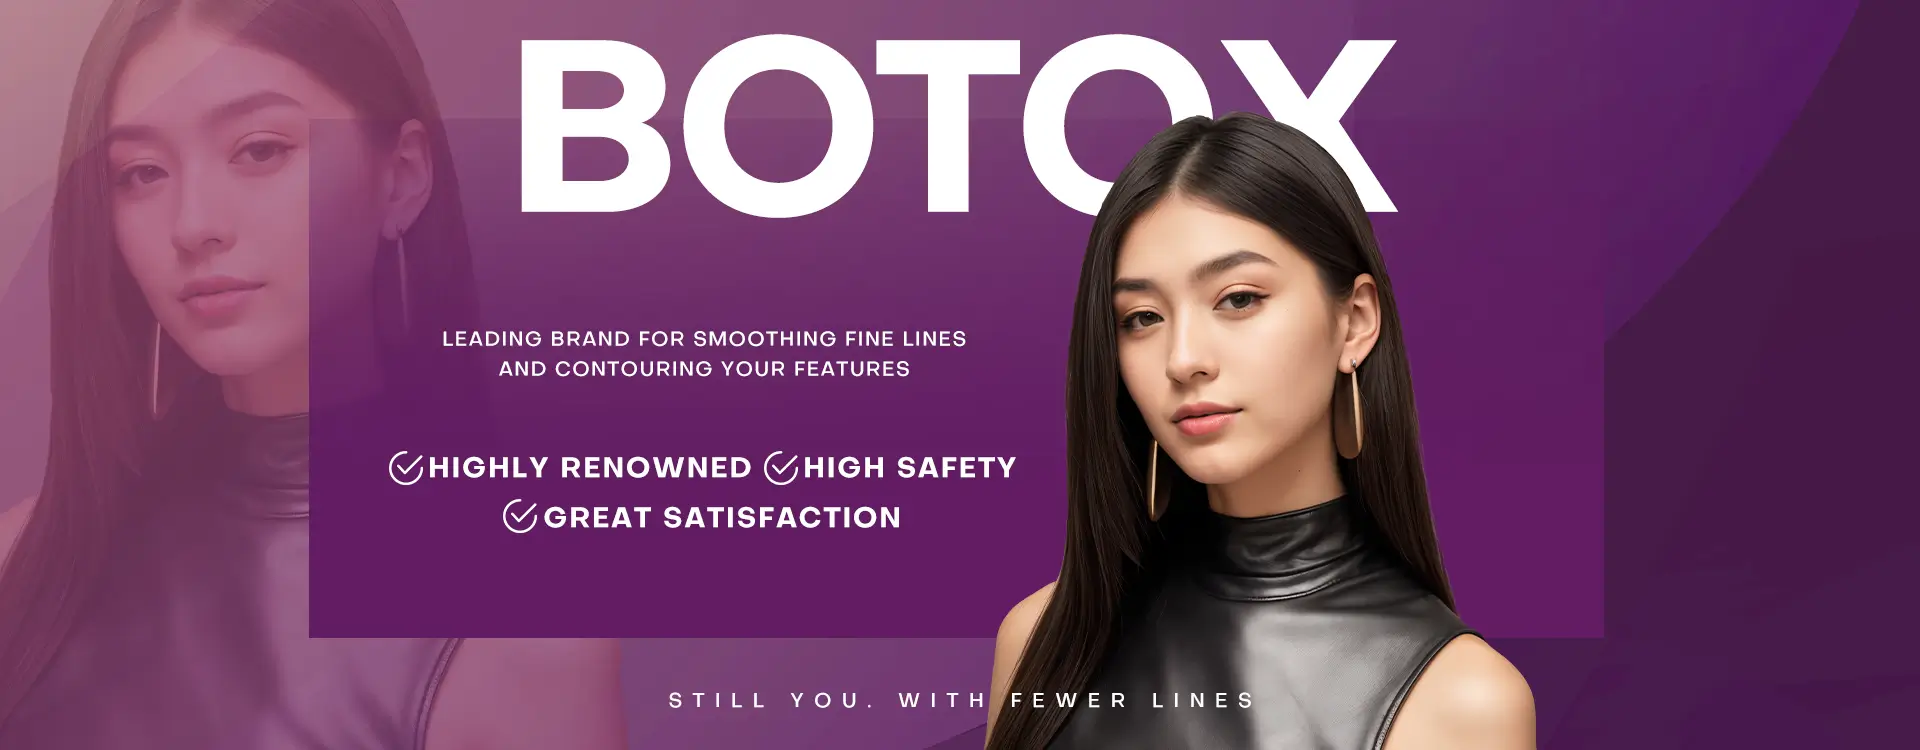 Botox - Leading Brand for Smoothing Fine Lines and Contouring Your Features